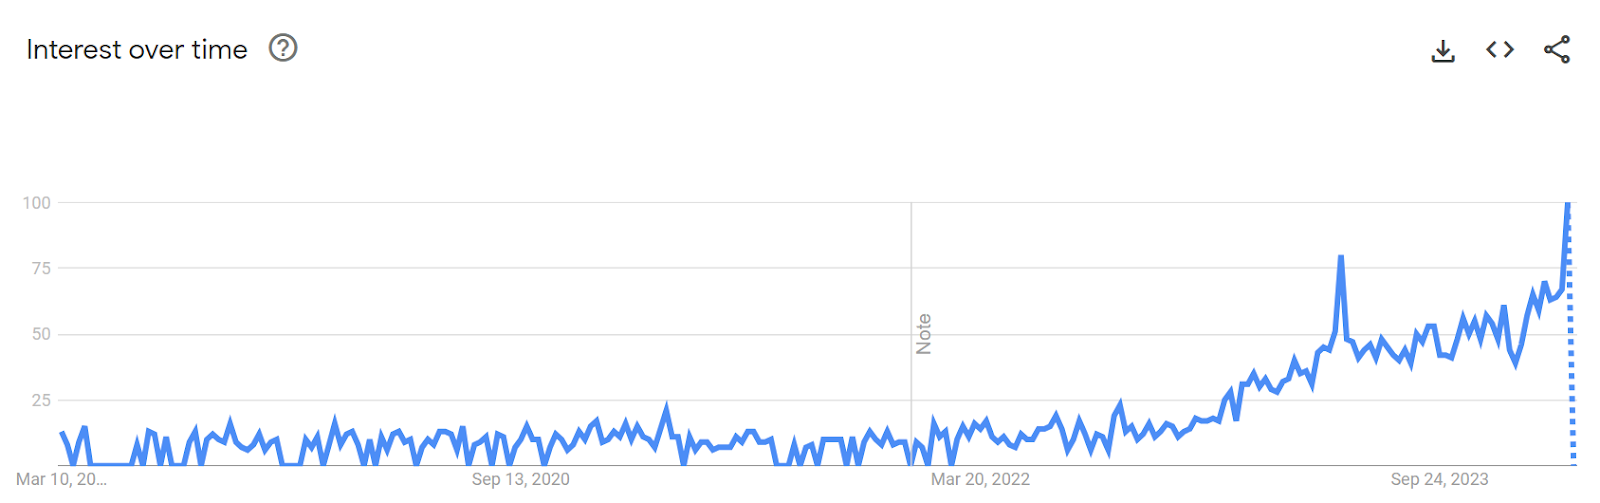 Google Trends data showing the increasing interest in AI CRM over the past 5 years.